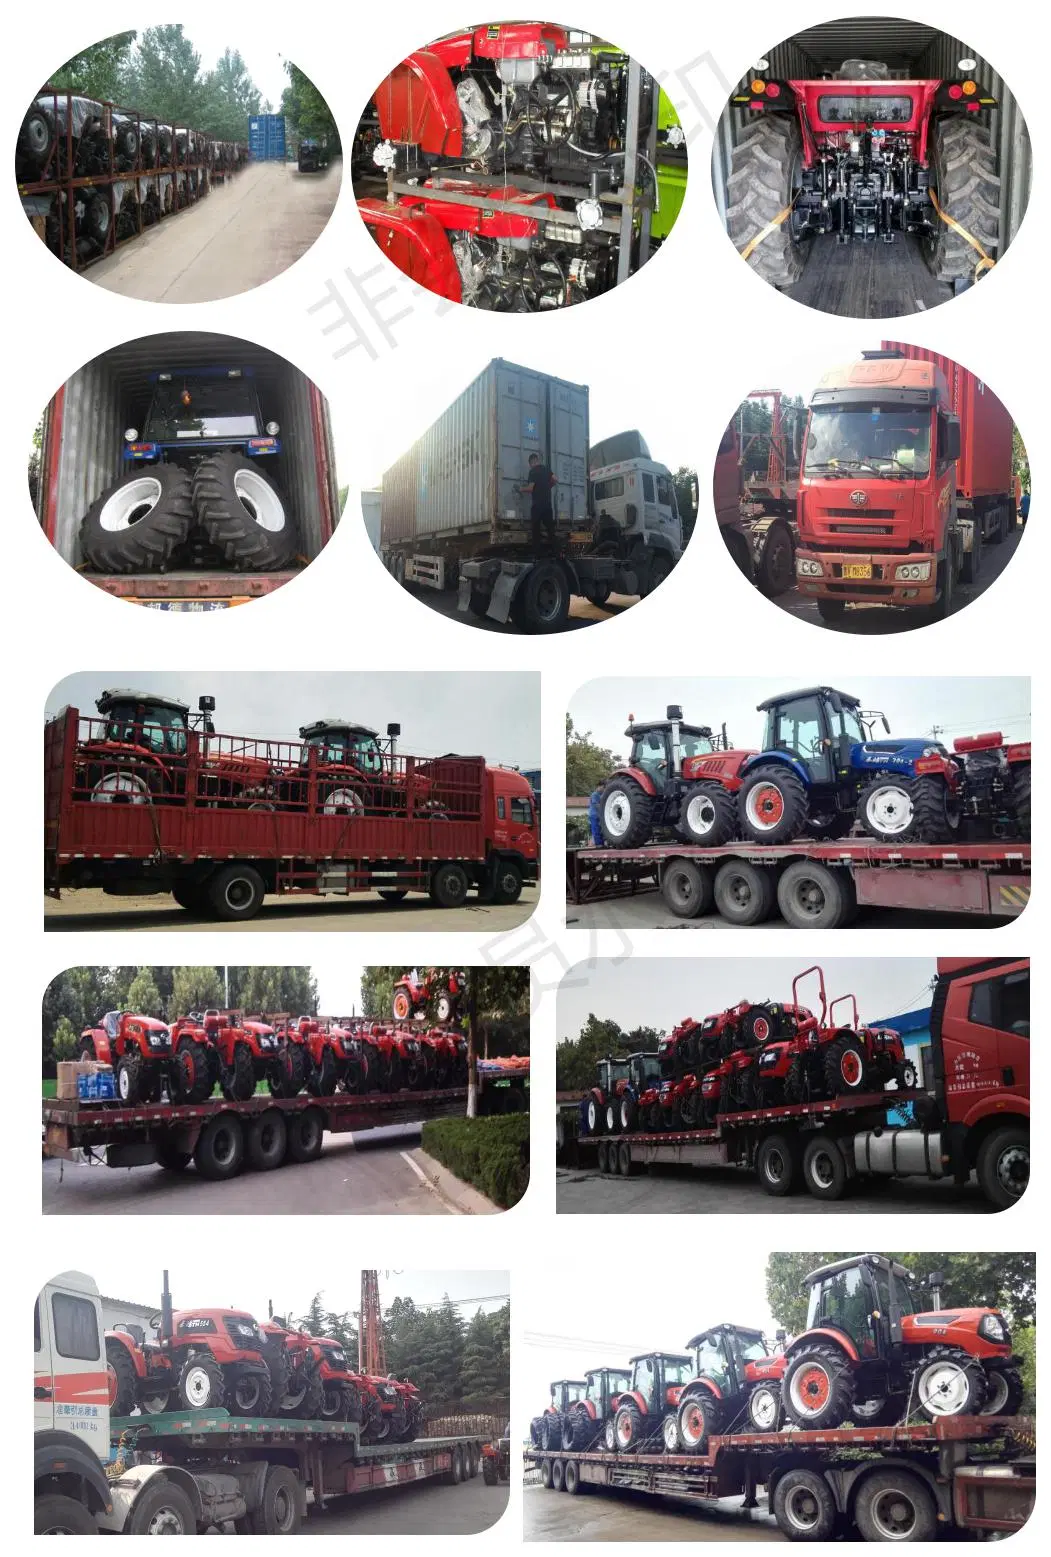 Taihong 40HP, 45HP, 50HP, 55HP 2WD/4WD Mini/Small/Large Agricultural Wheel Farm Tractor with Wider Tyres